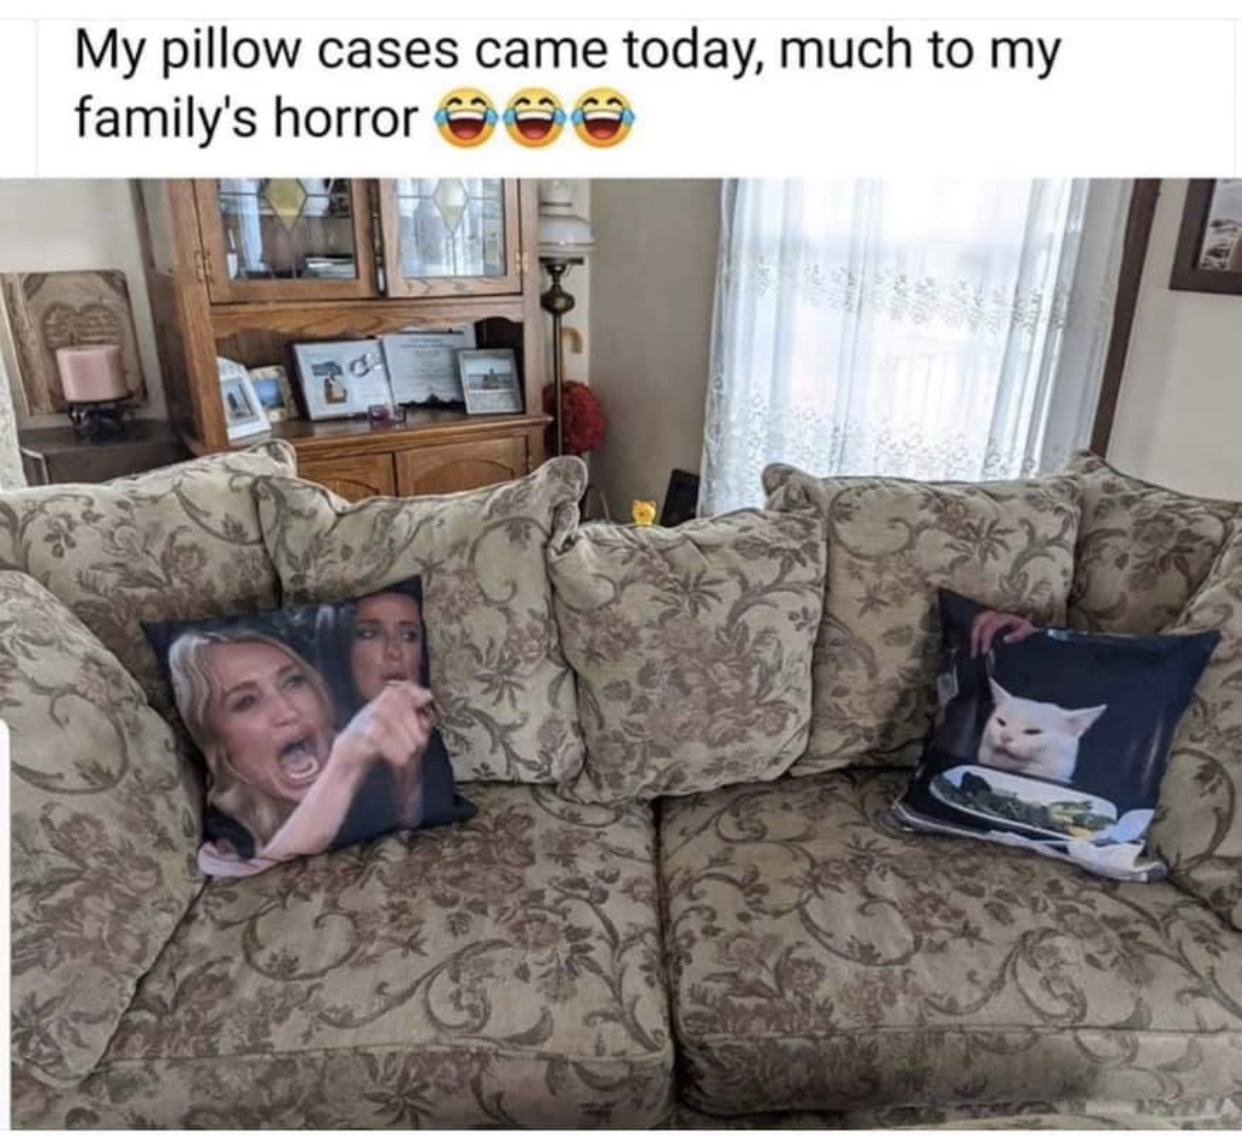 couch - My pillow cases came today, much to my family's horror